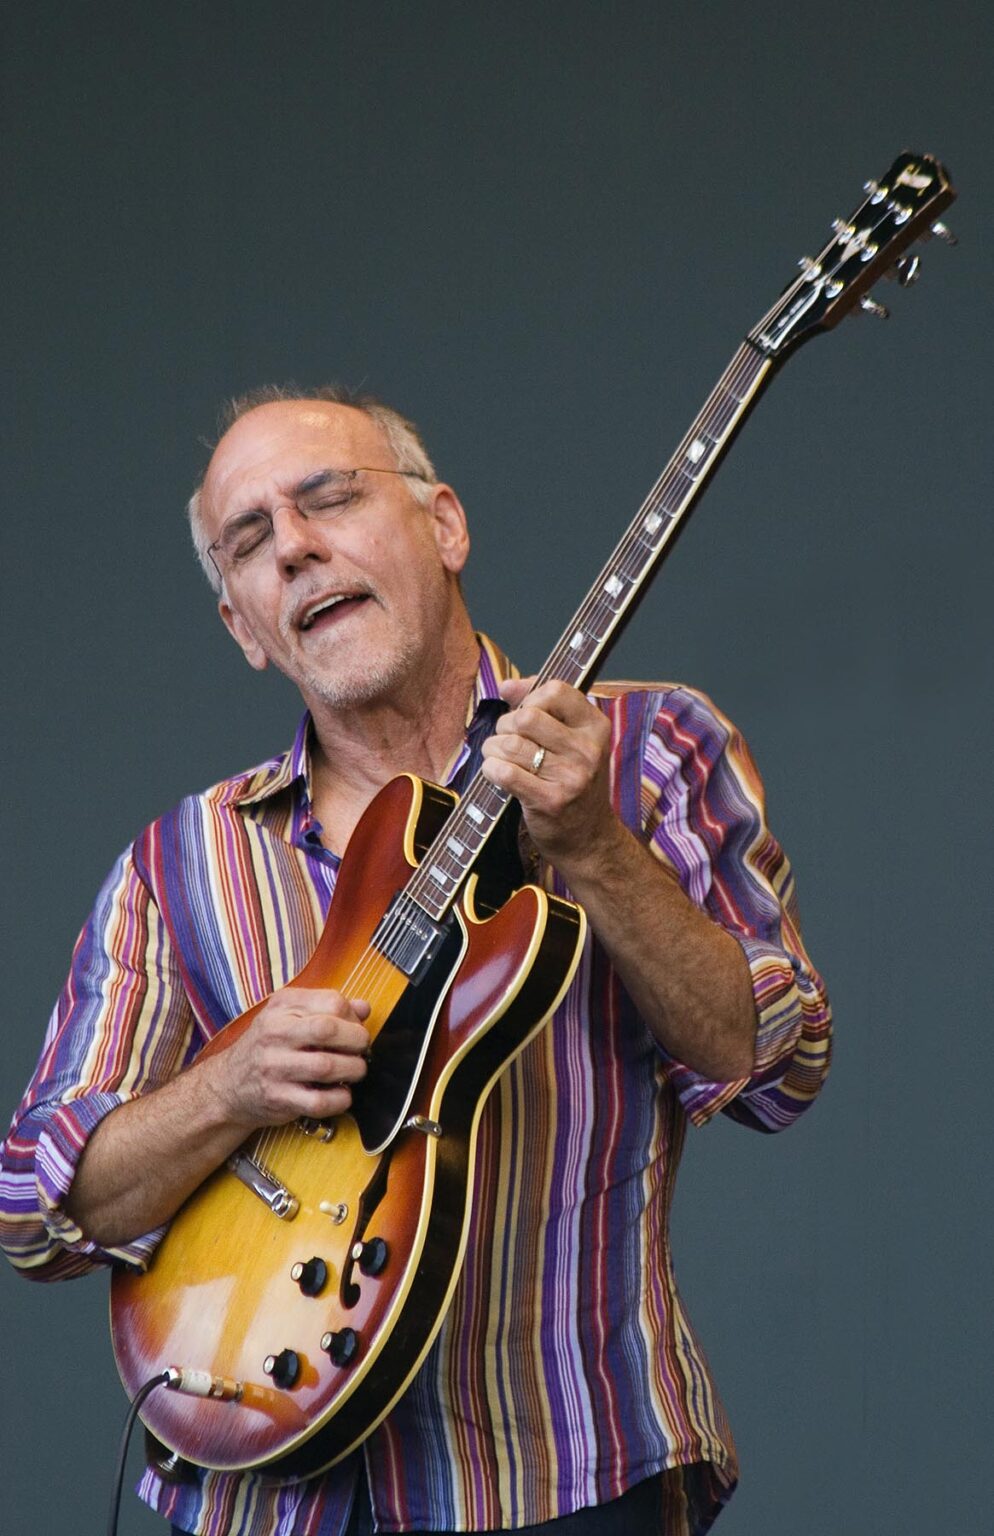 LARRY CARLTON plays guitar with the SAPPHIRE BLUES BAND at the MONTEREY JAZZ FESTIVAL